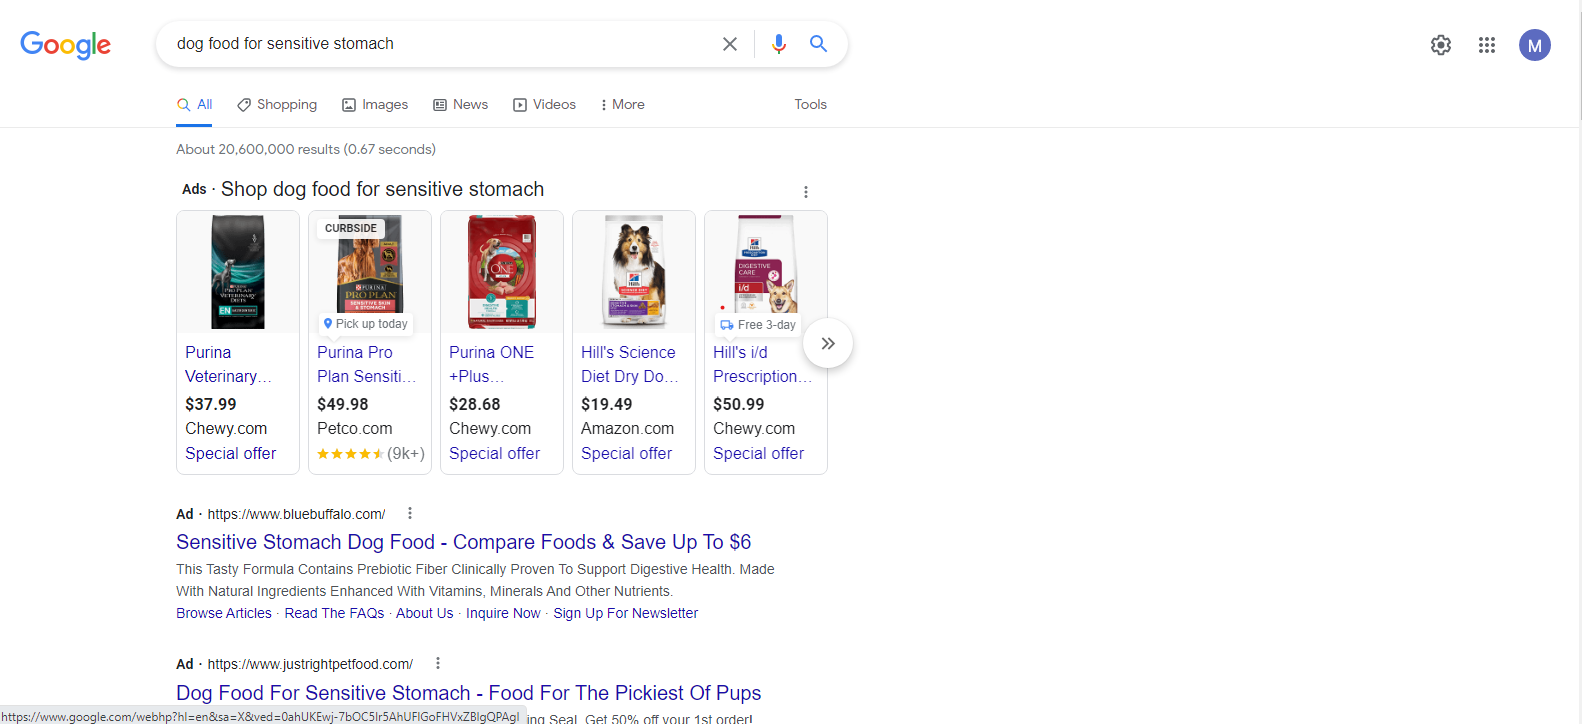 Screenshot of a Search Engine Results Page